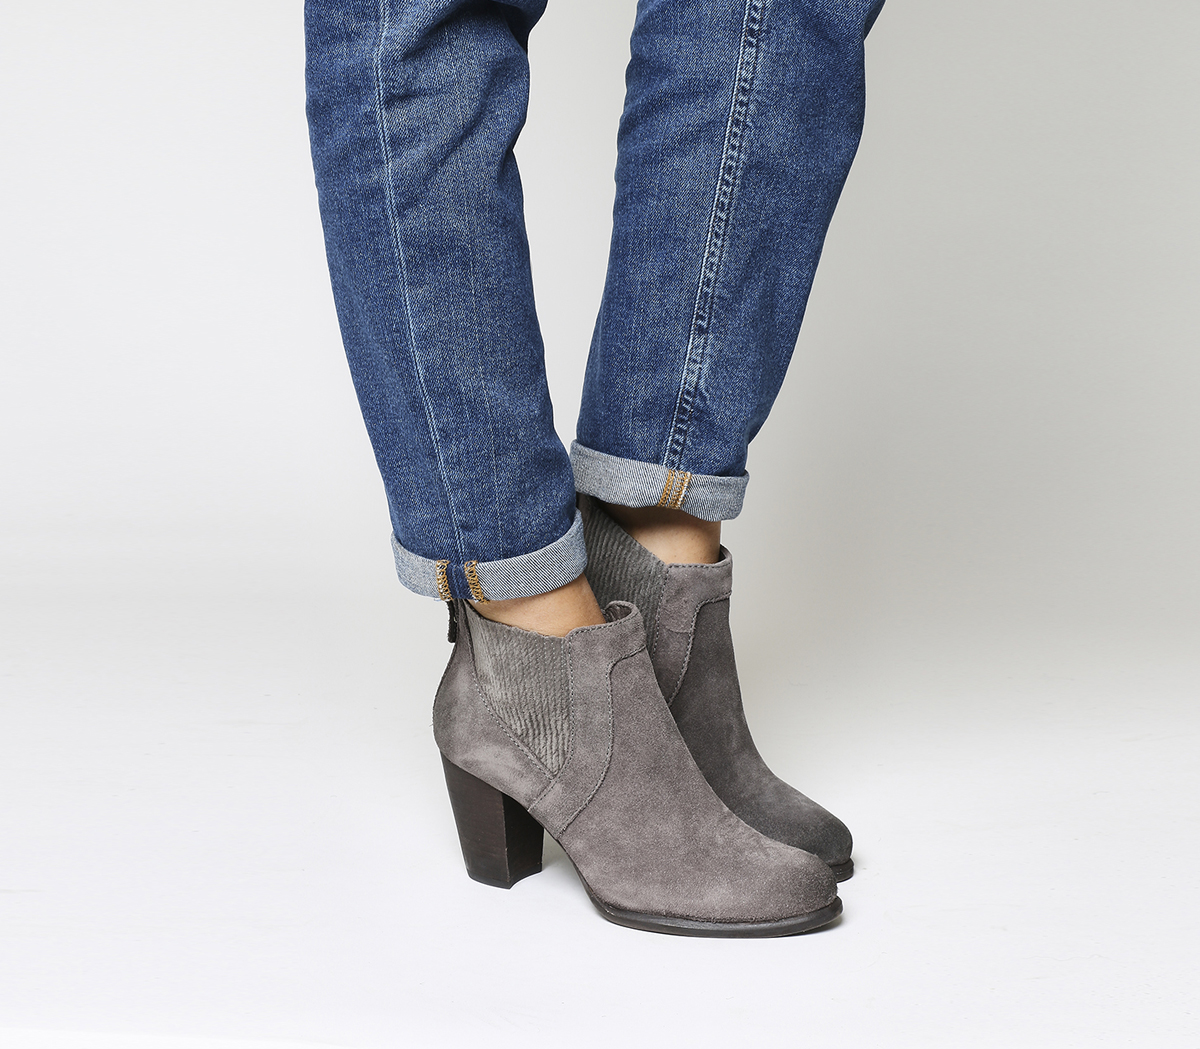 ugg high heel ankle boots